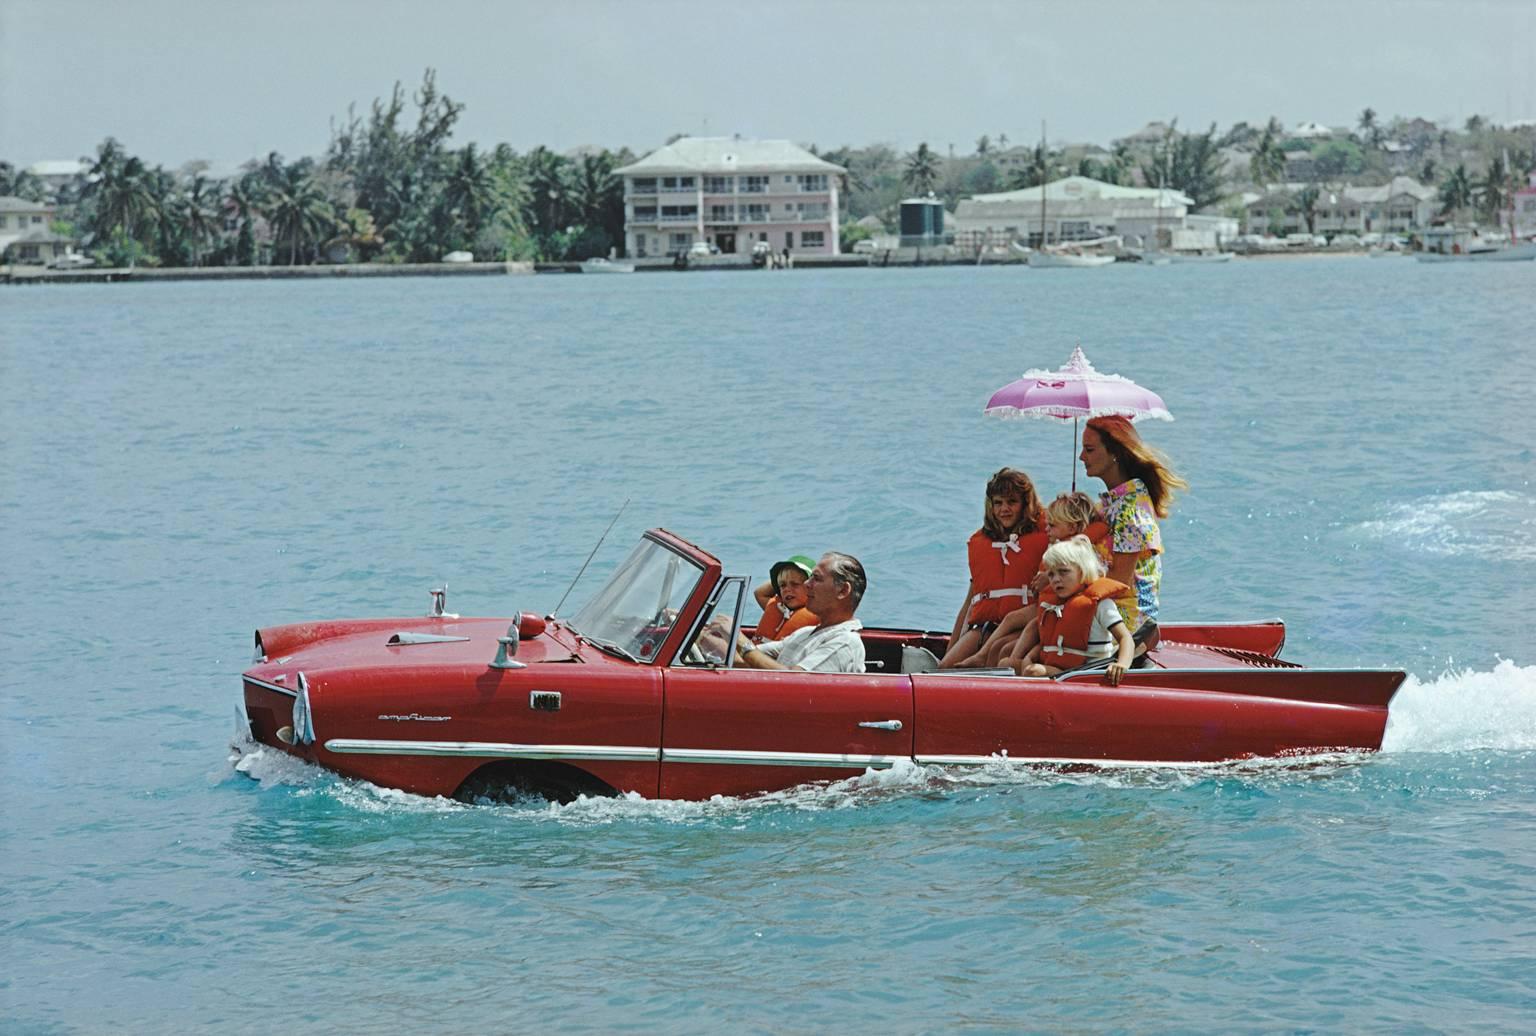 Sea Drive by Slim Aarons

Film producer Kevin McClory takes his wife Bobo Sigrist and their family for a drive in an 'Amphicar' across the harbour at Nassau. The children are Bianca Juarez (Bobo's daughter from another relationship) and Siobhan,